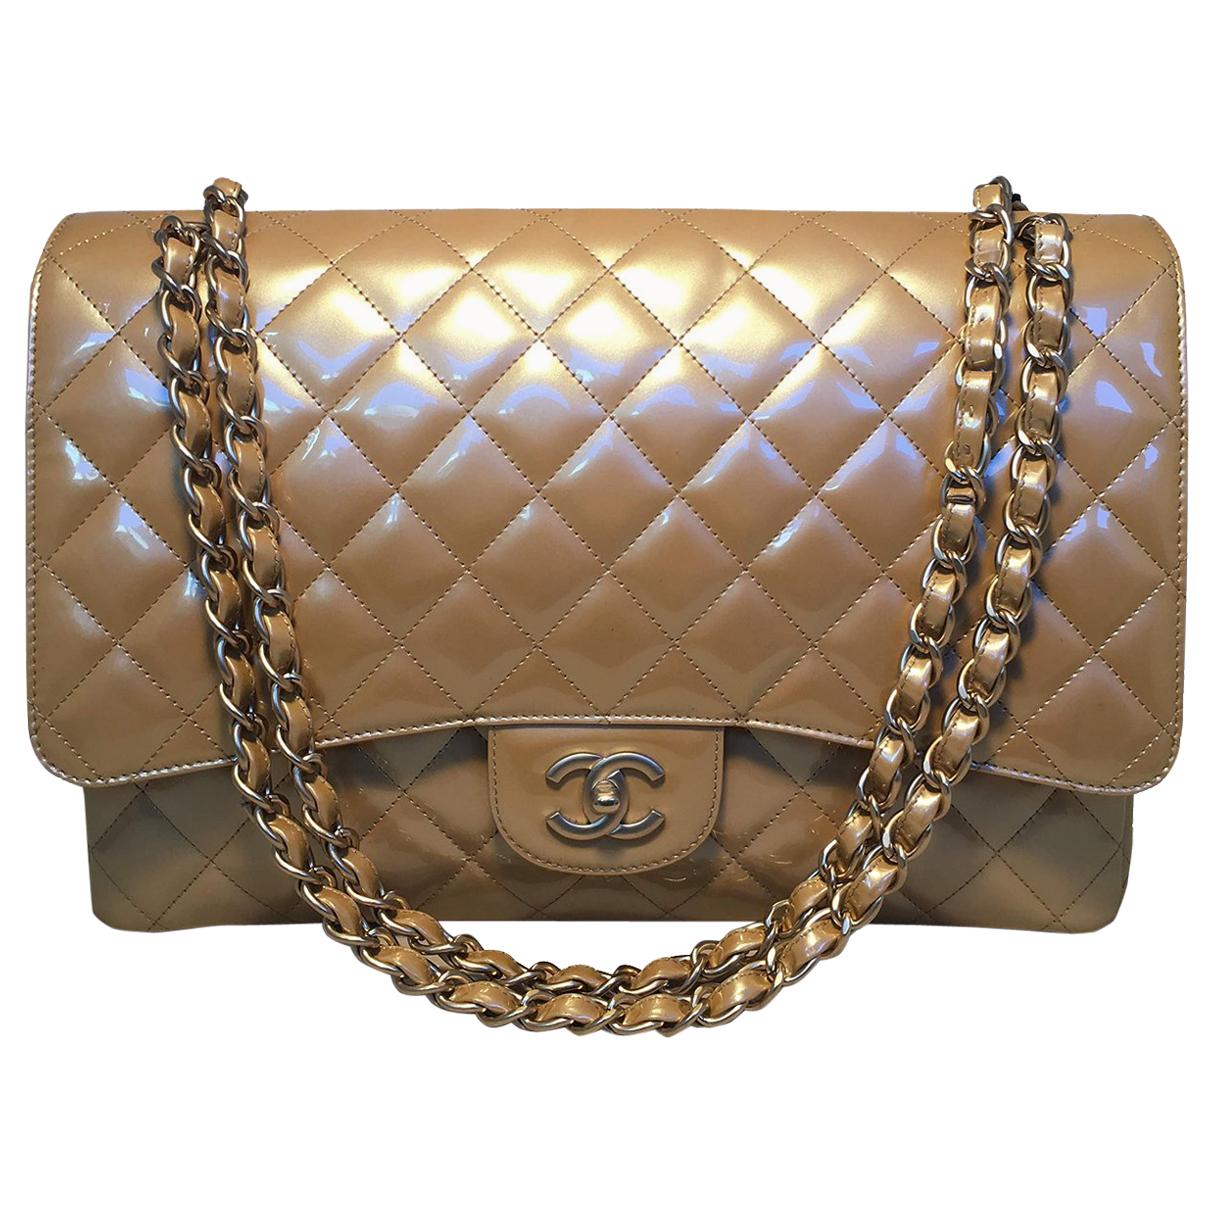 Chanel Nude Gold Pearlized Patent Leather Maxi Classic Flap Shoulder bag